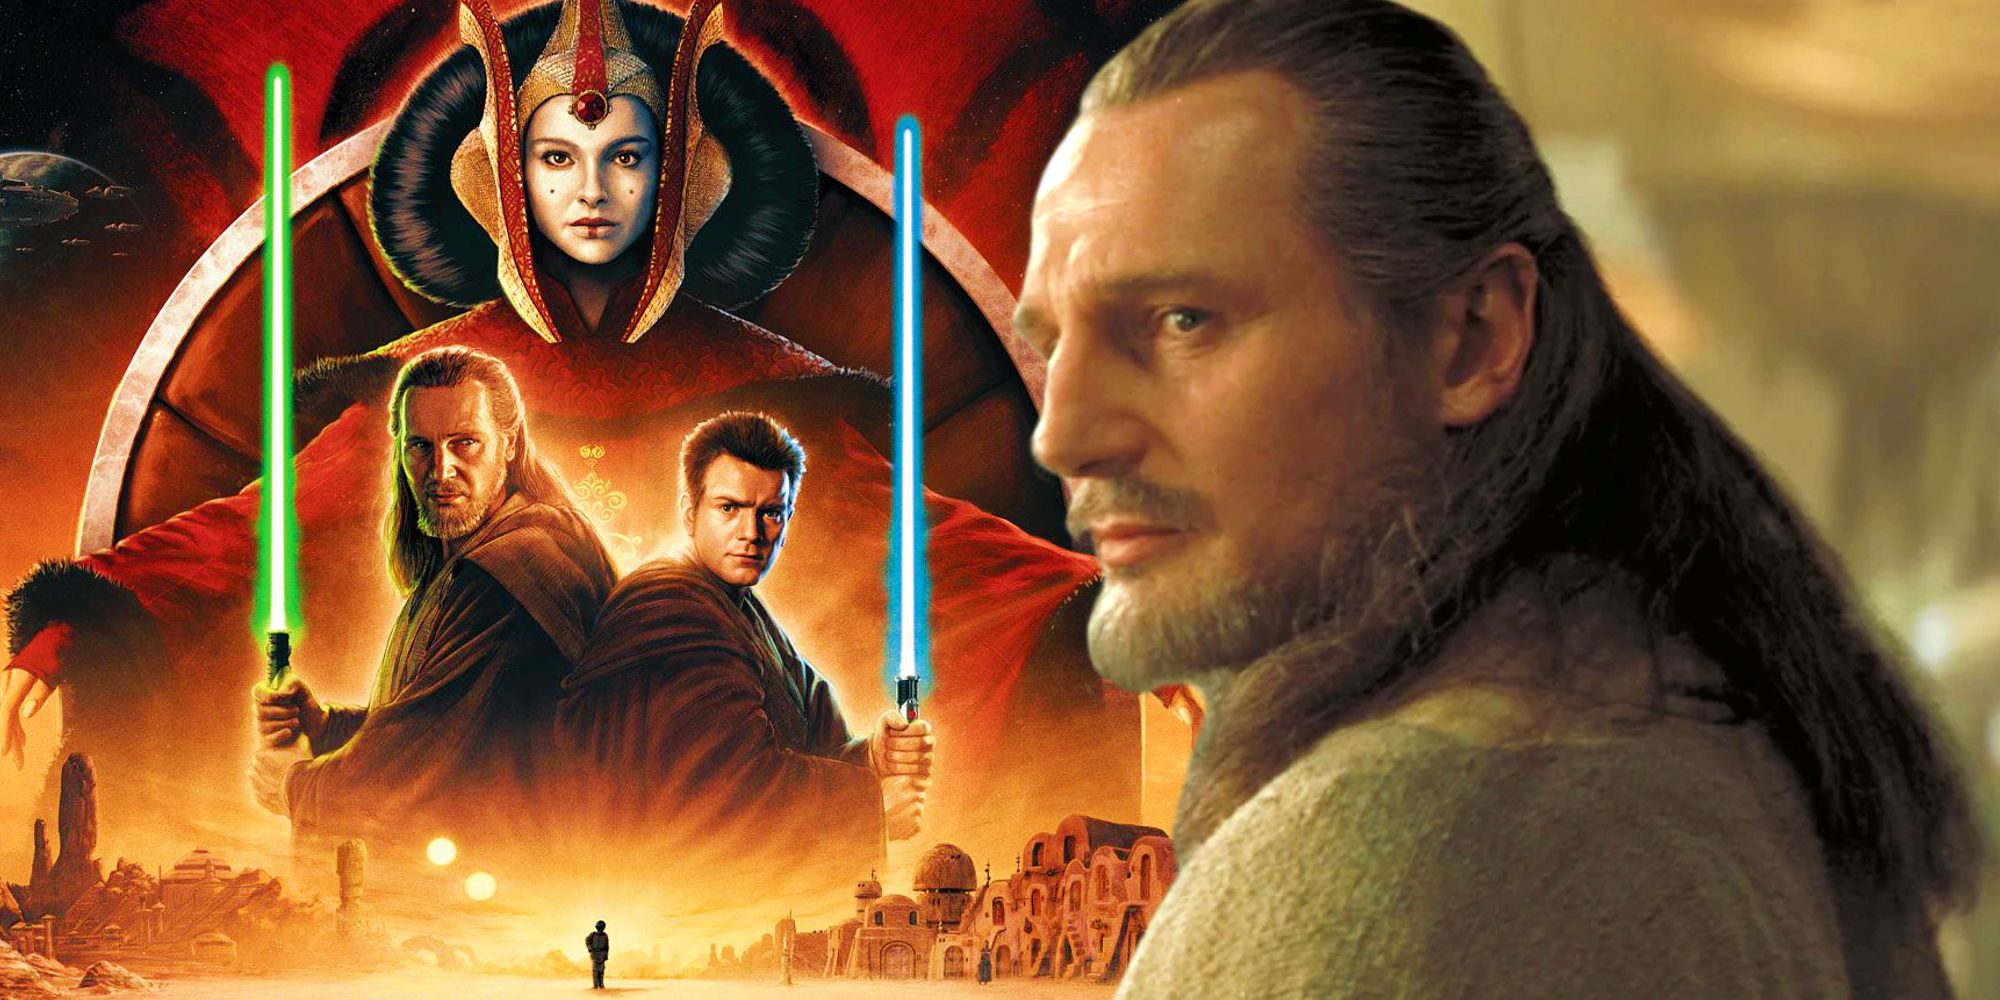 Qui-Gon and Obi-Wan wielding their lightsabers beneath Padme in the 25th anniversary poster for The Phantom Menace next to Liam Neeson staring as Qui-Gon Jinn